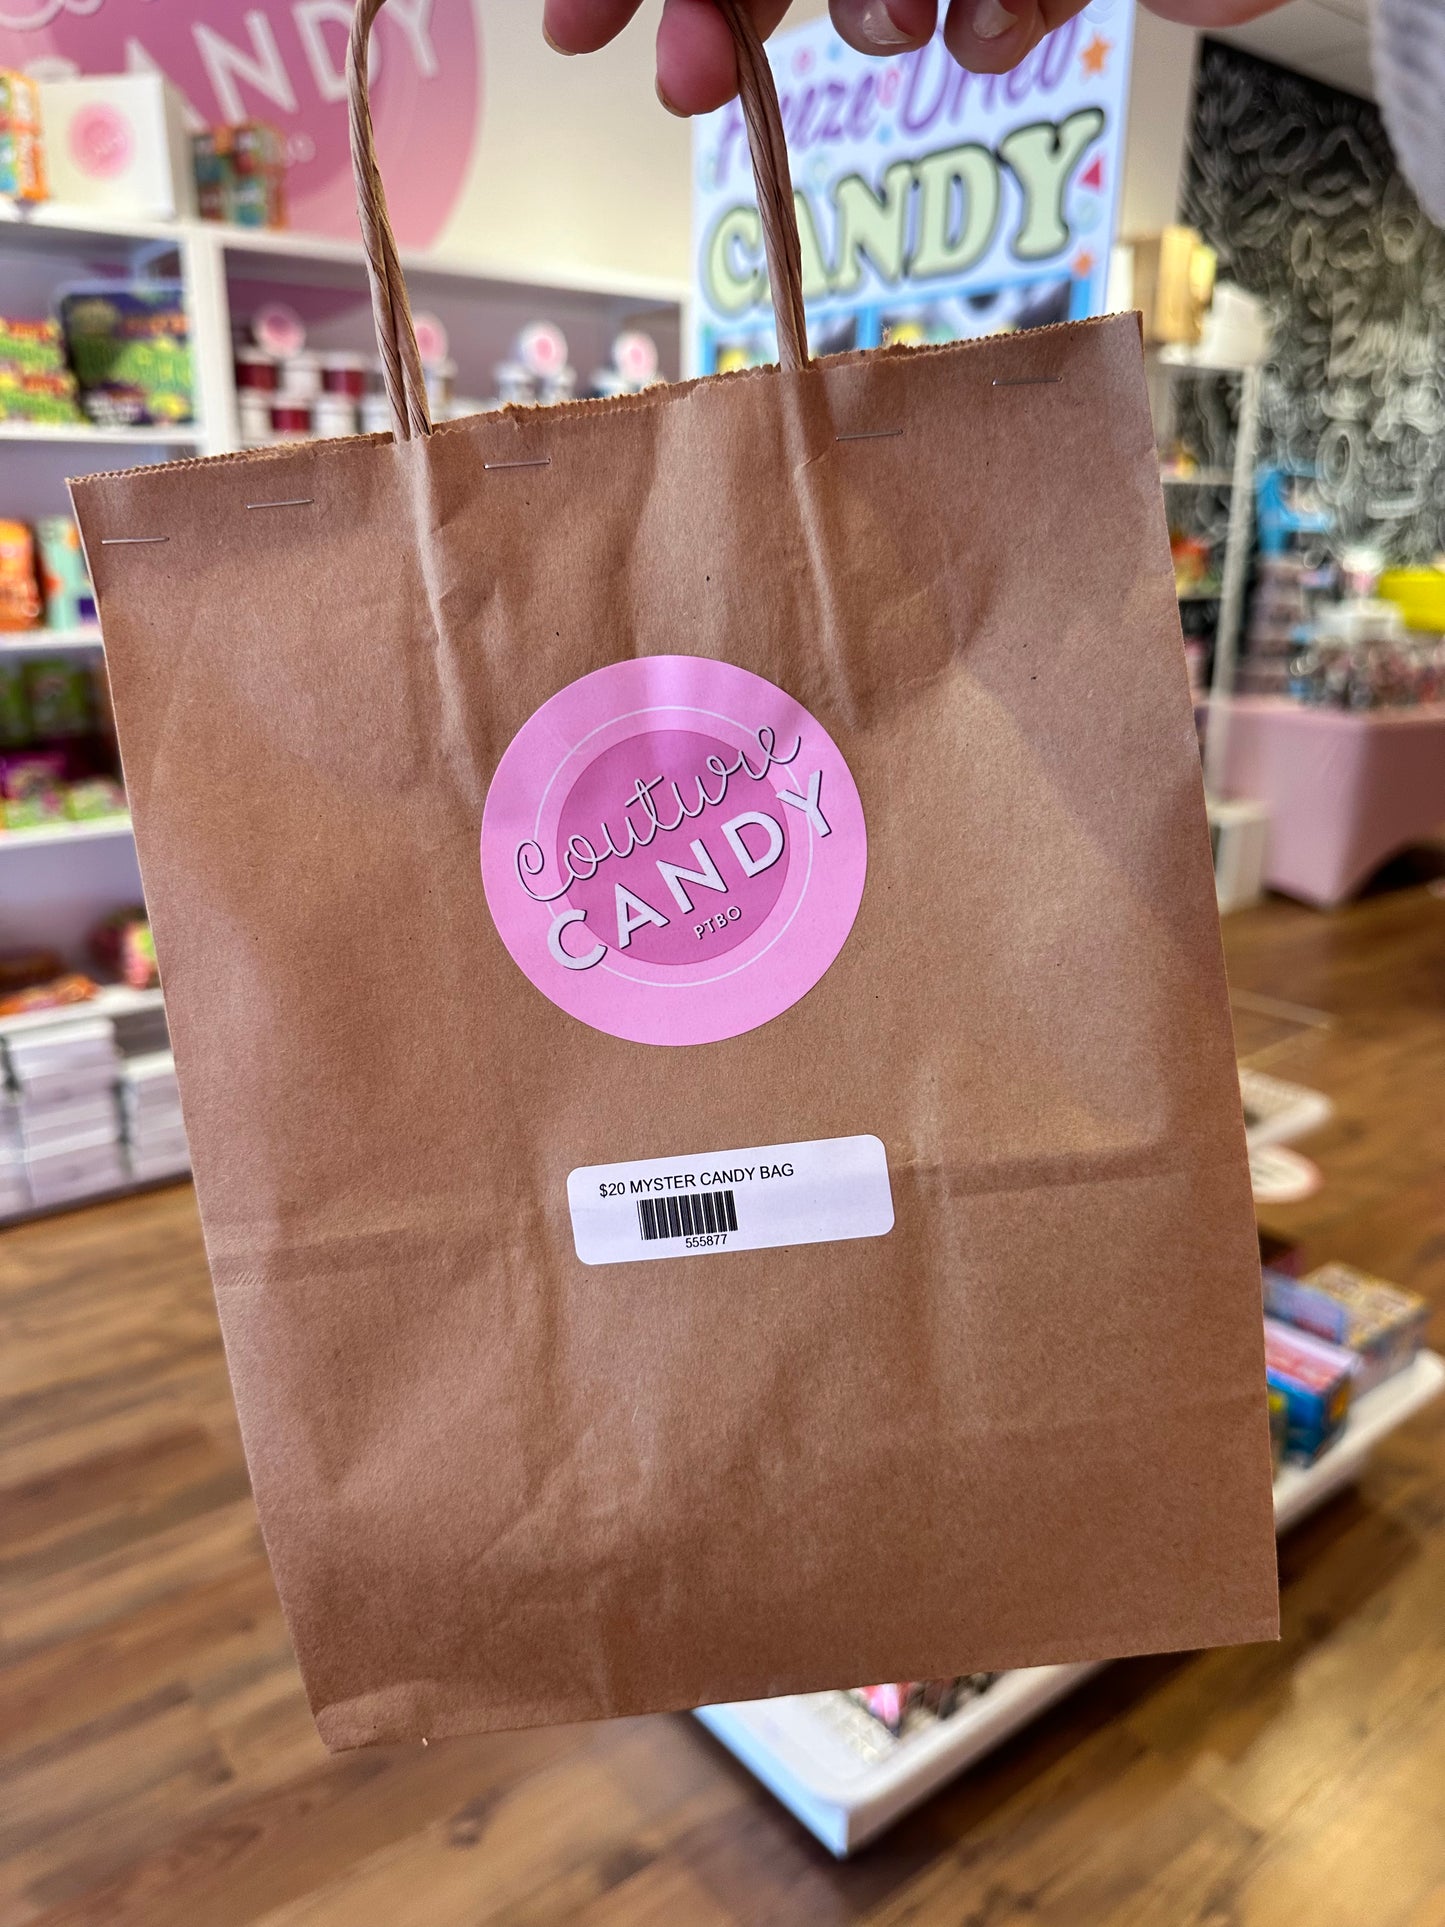 Small Mystery Candy Bag - Order packed Live on TikTok!